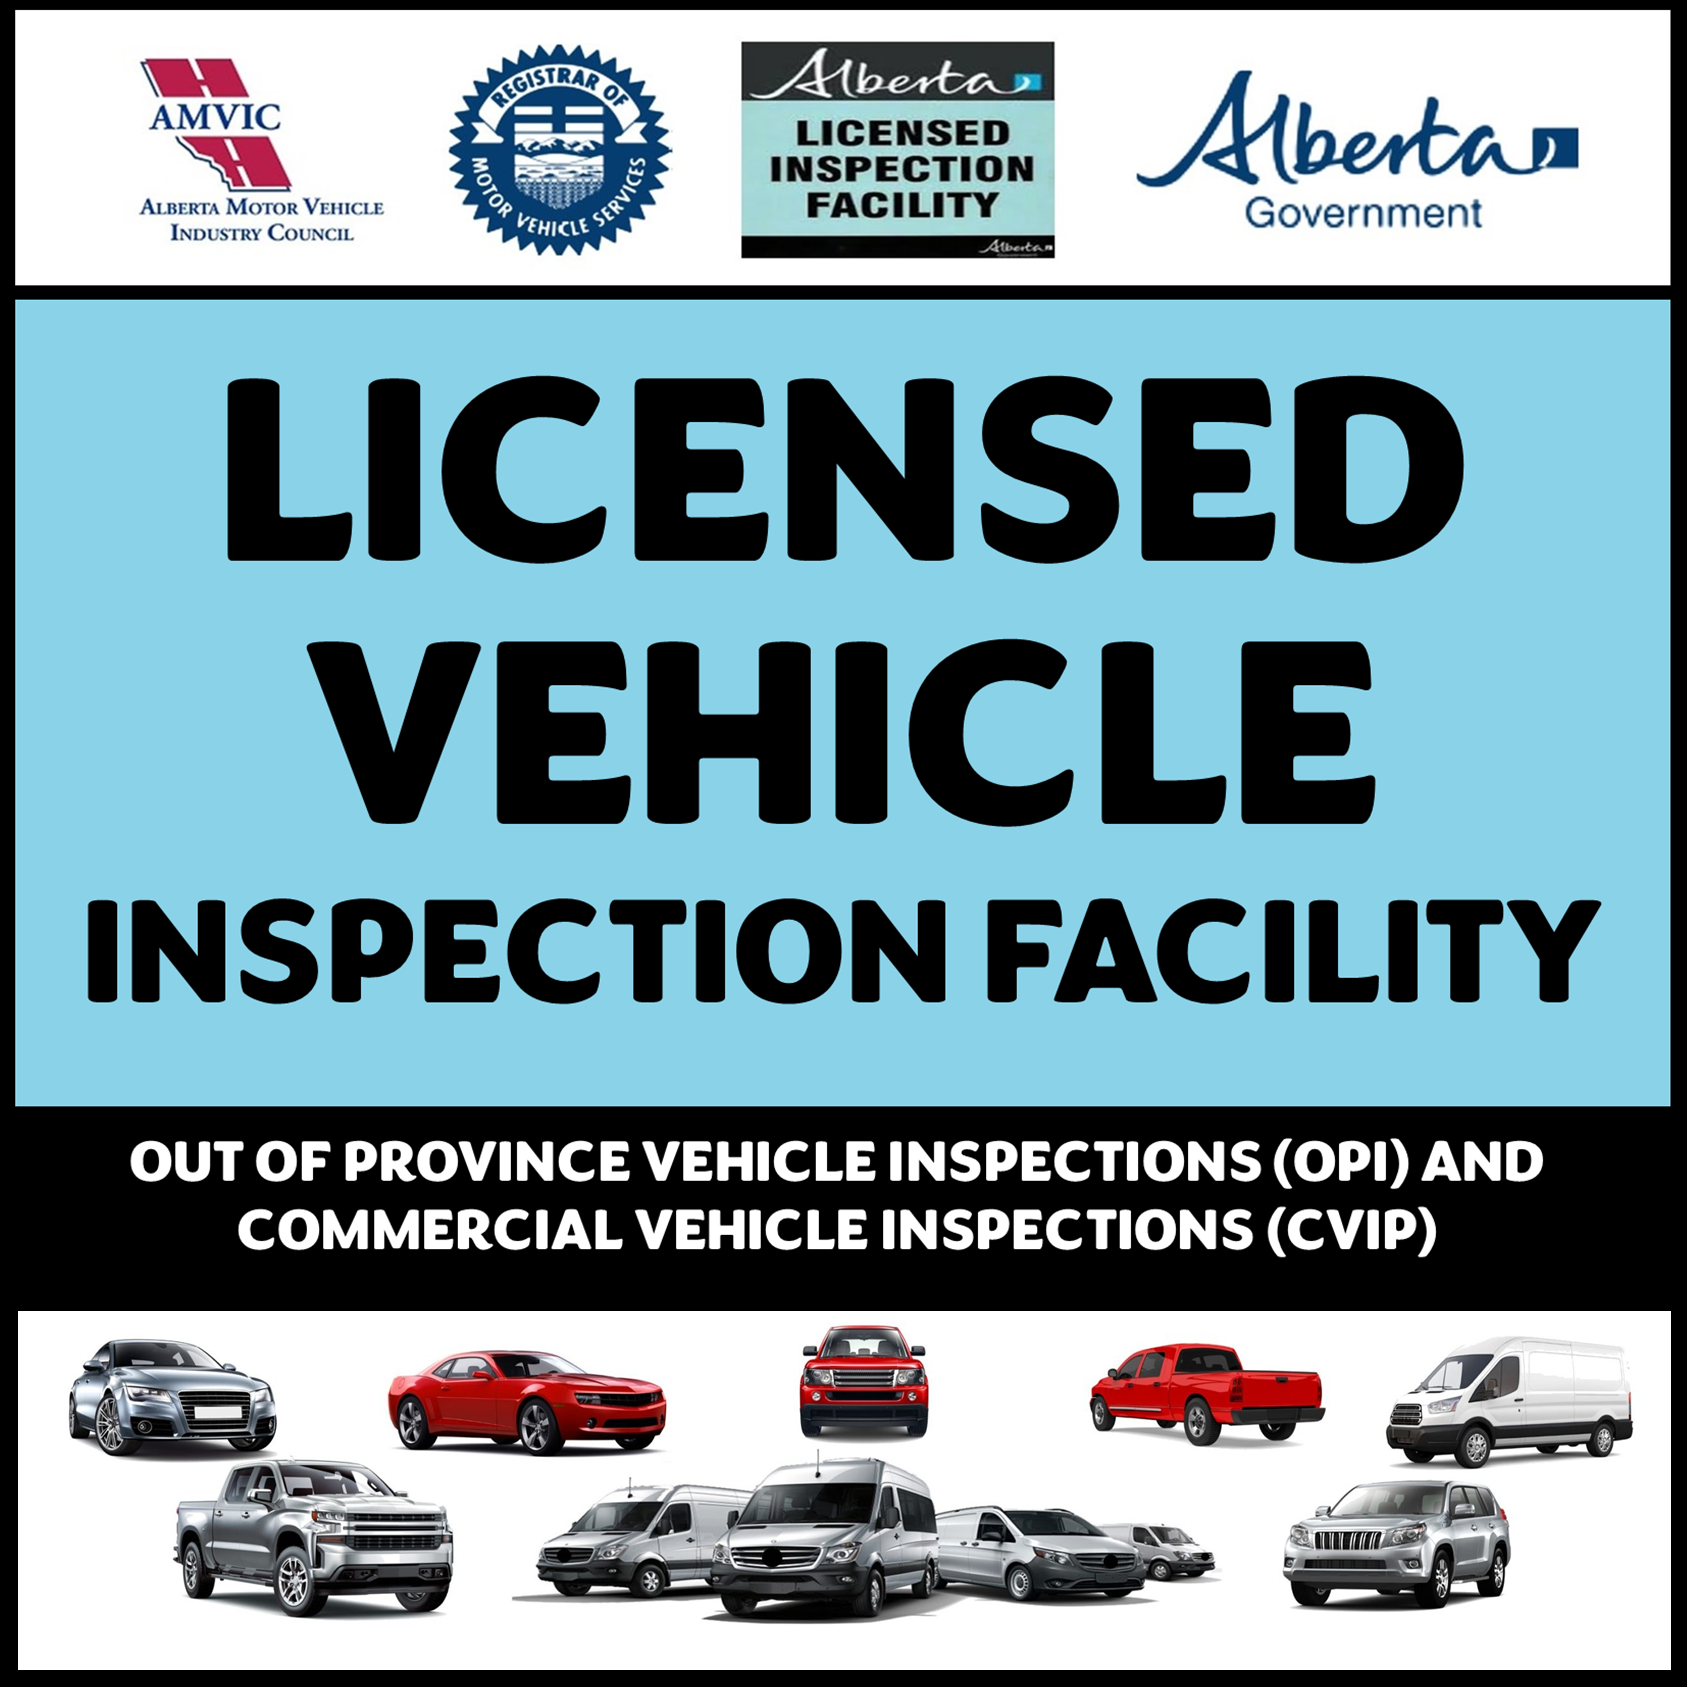 LICENSED VEHICLE INSPECTION FACILITY